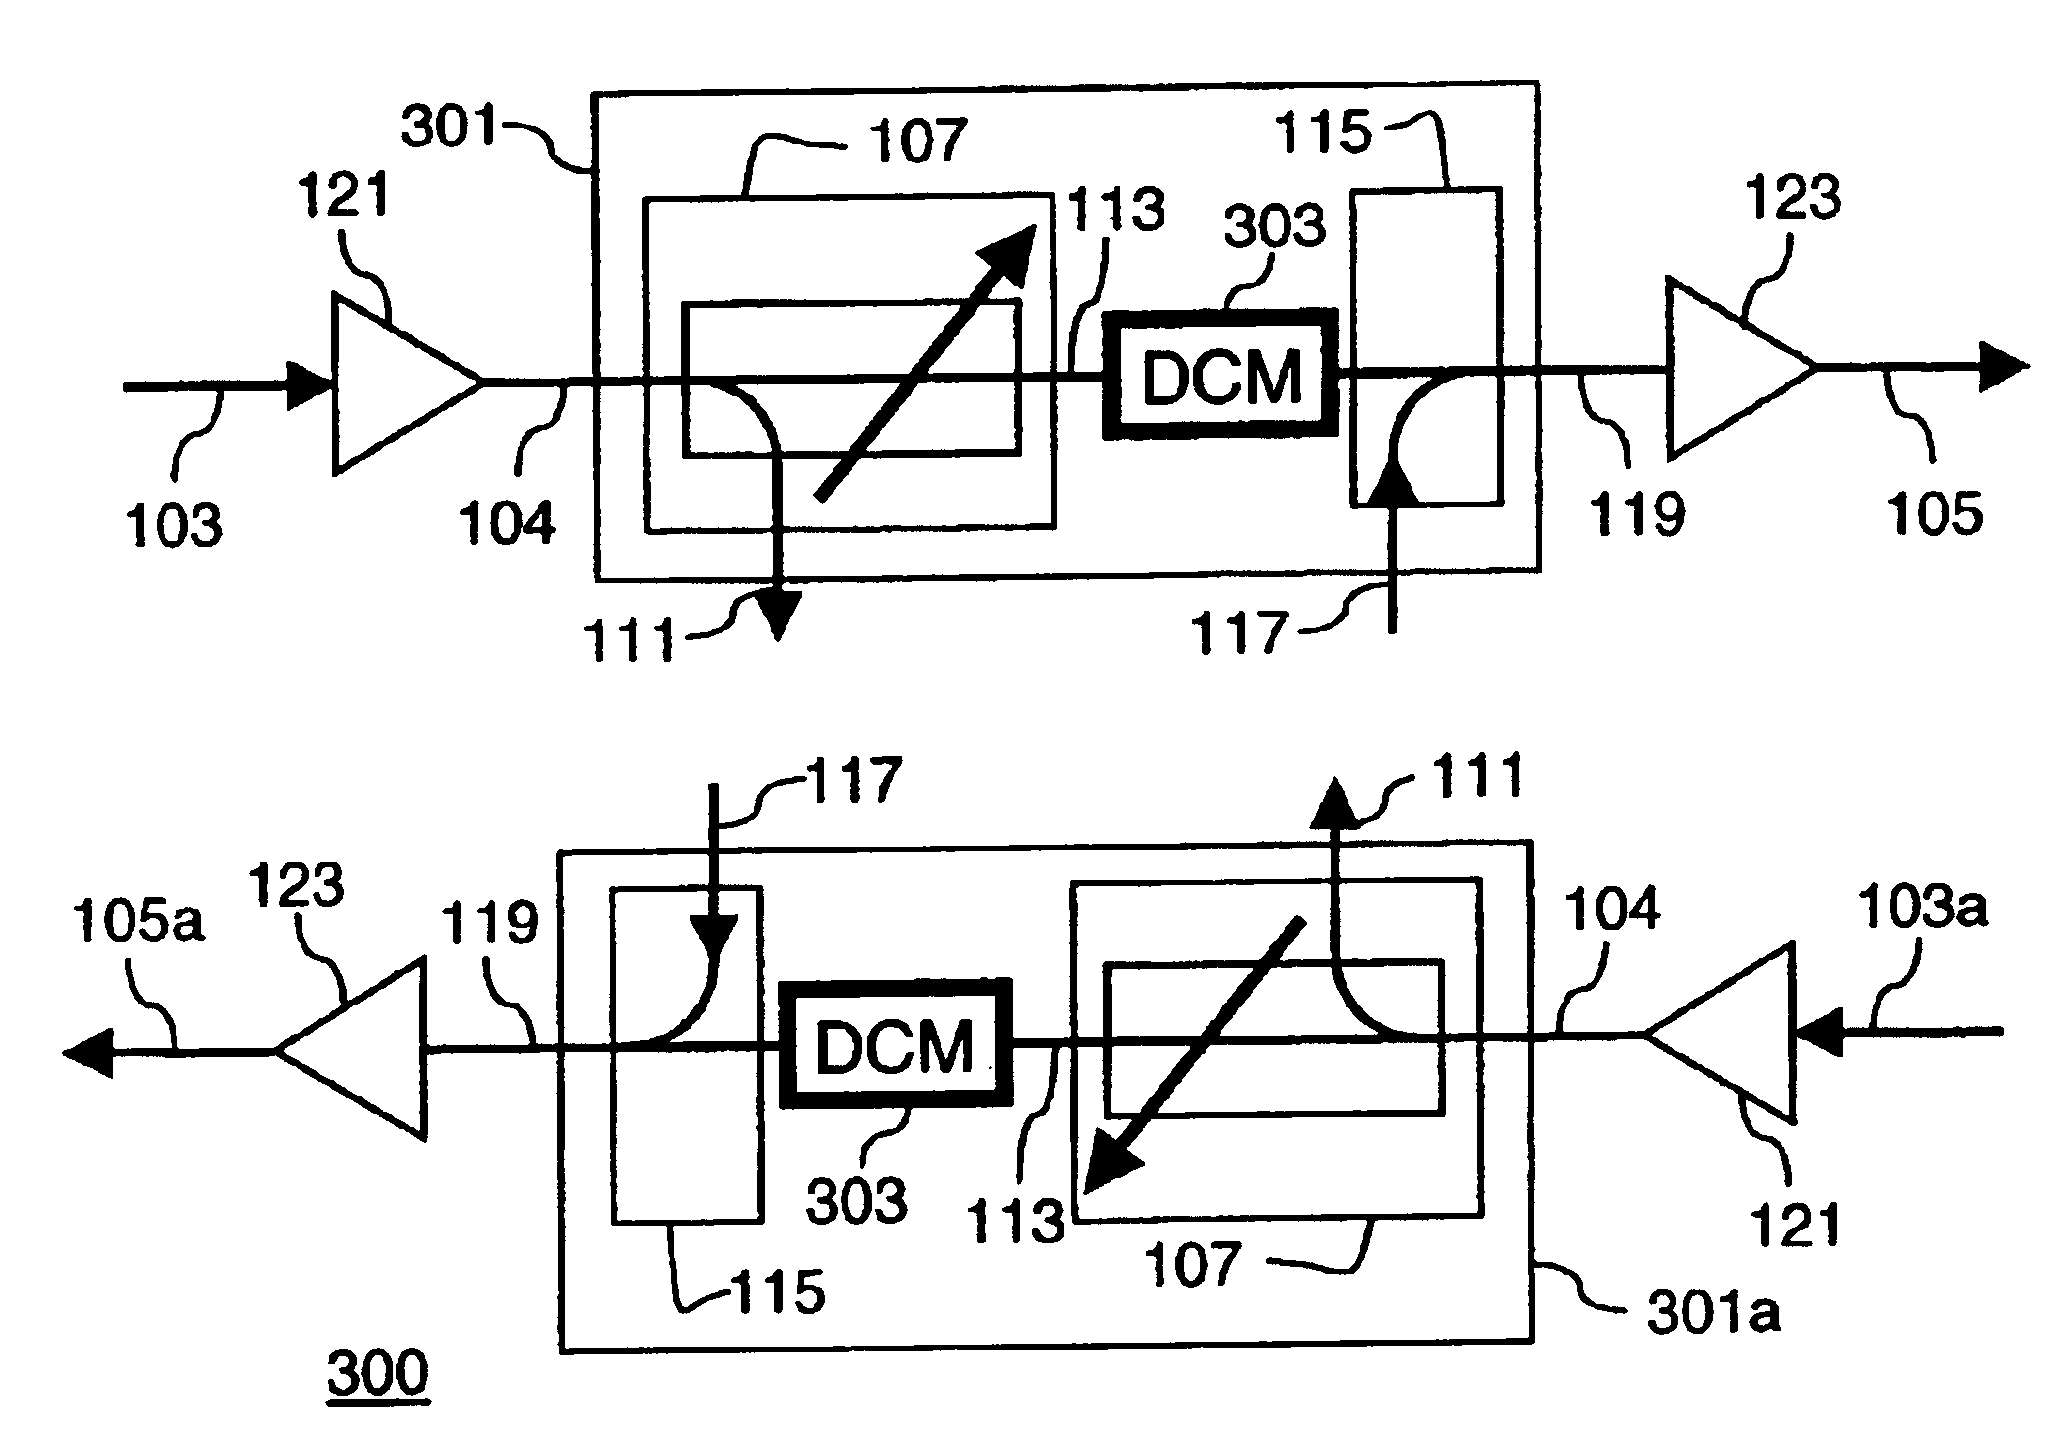 Reconfigurable optical add/drop multiplexer with buried dispersion compensation module